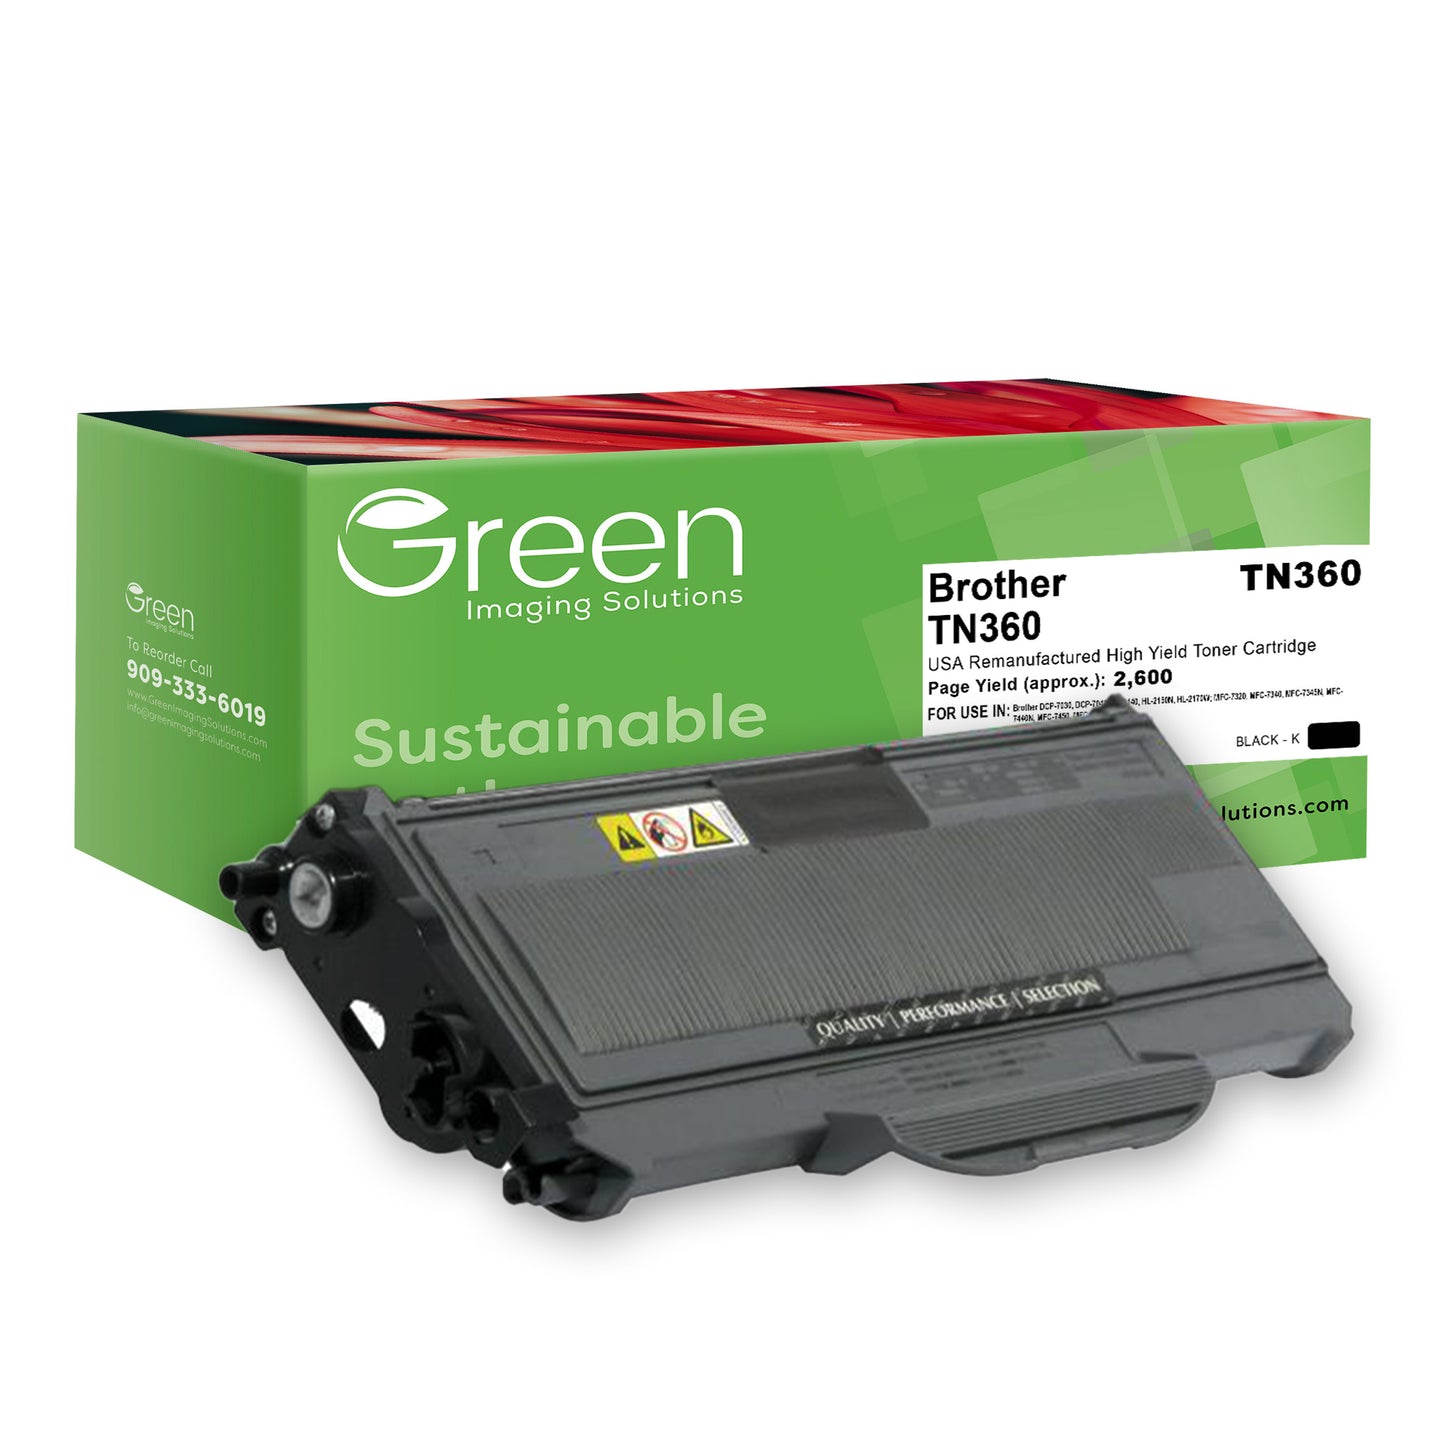 Green Imaging Solutions USA Remanufactured High Yield Toner Cartridge for Brother TN360